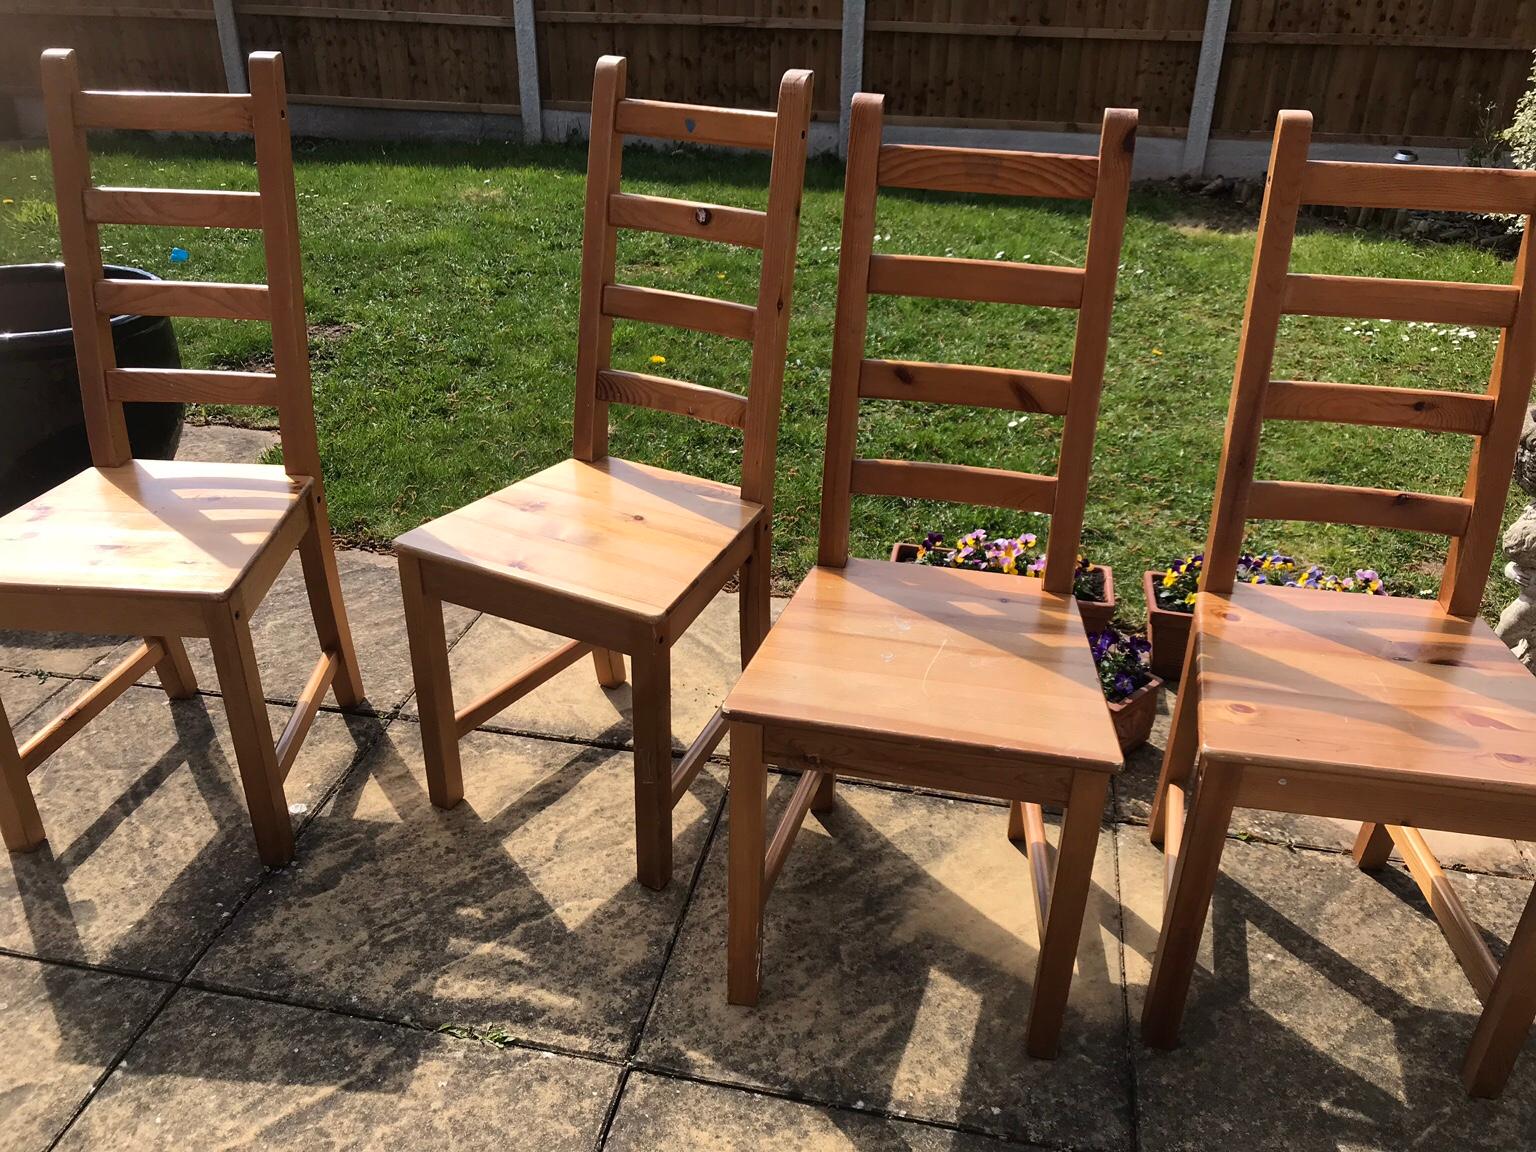 Large Pine Dining Table And 4 Chairs Markor In Ng9 Broxtowe For 60 00 For Sale Shpock